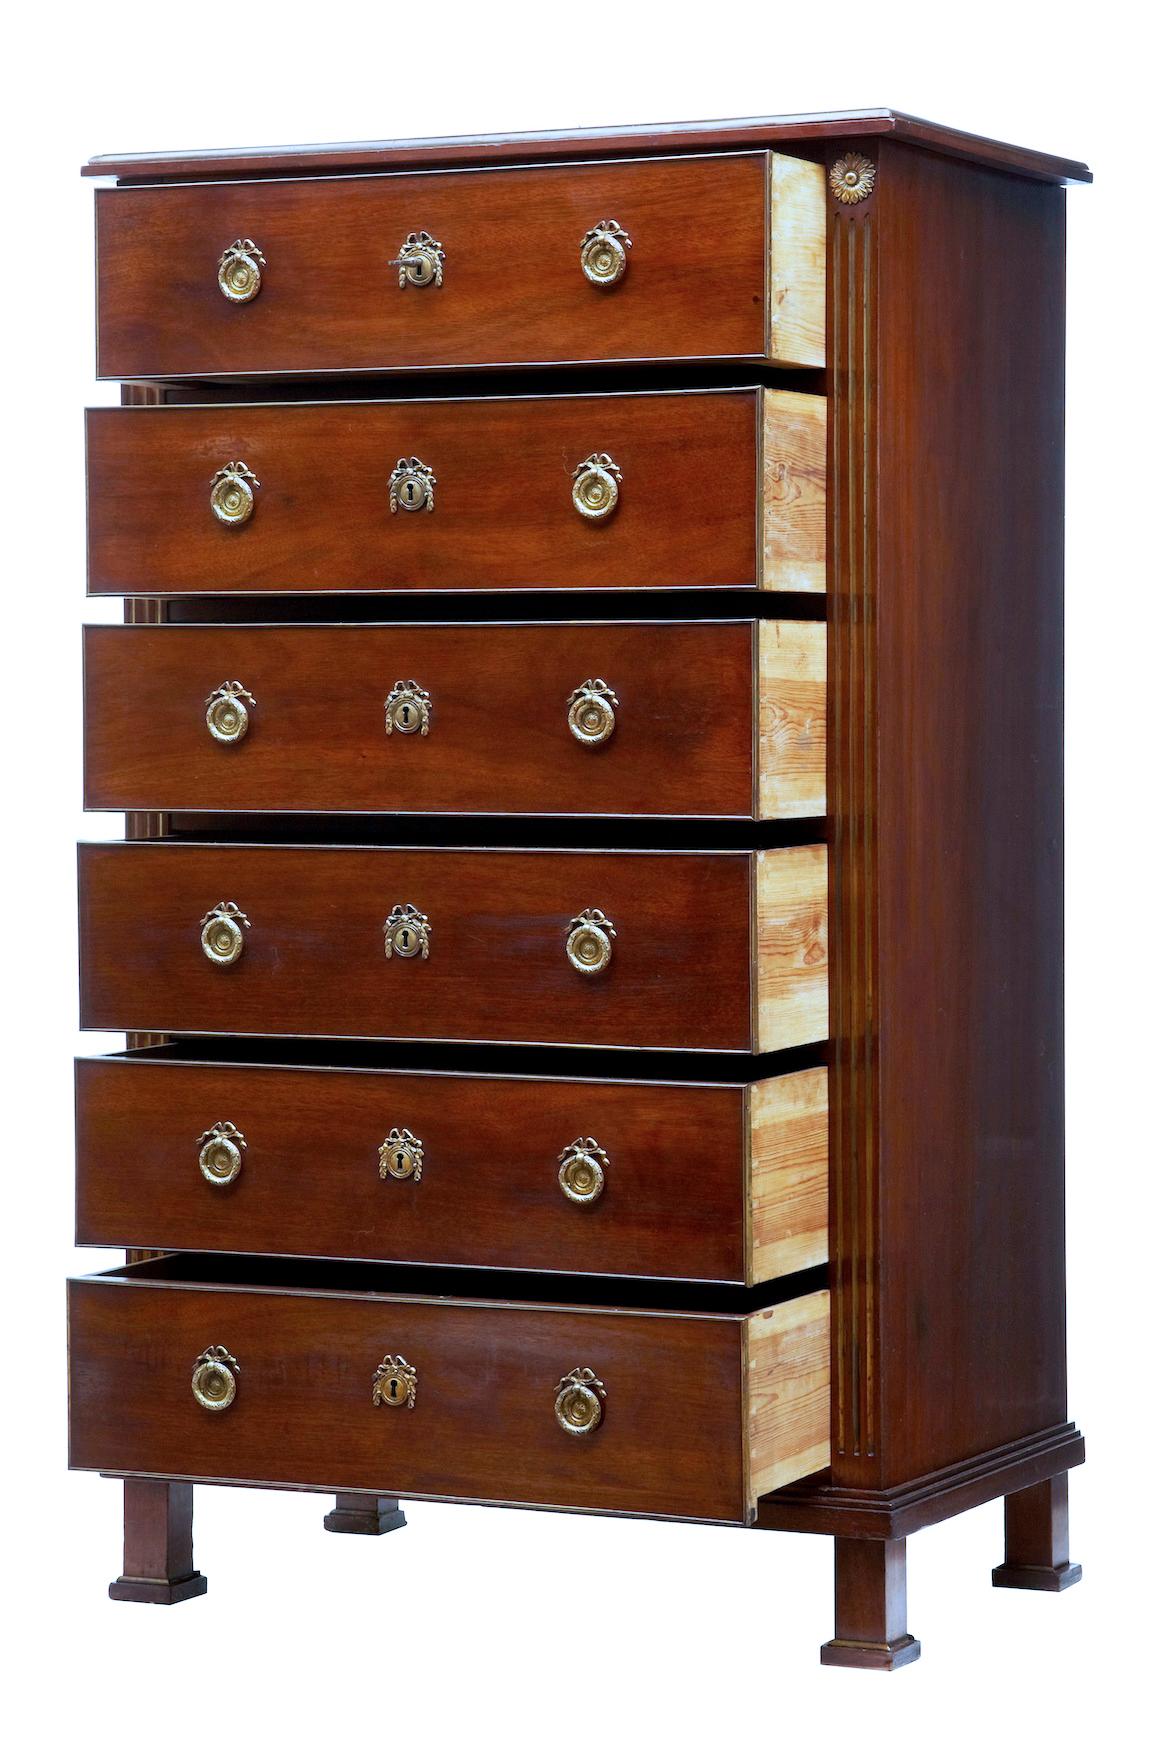 Swedish 19th Century Directoire Influenced Mahogany Tall Chest of Drawers